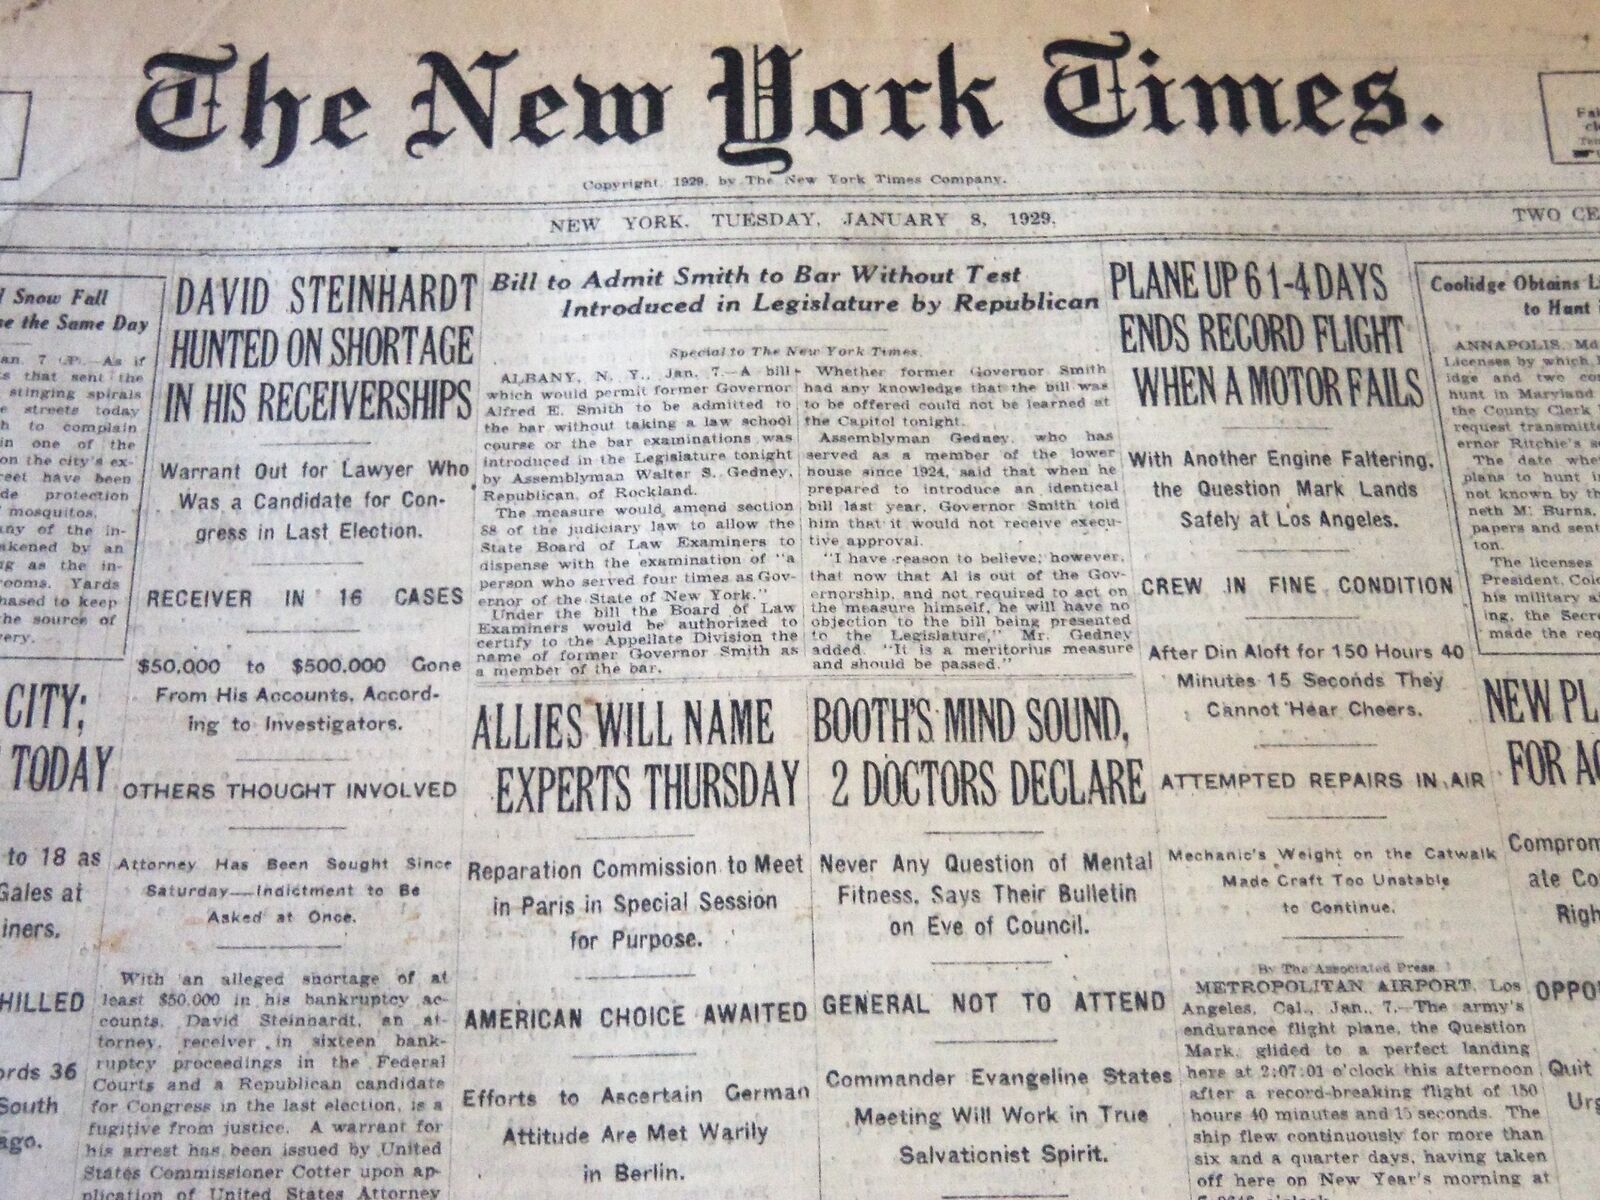 1929 JANUARY 8 NEW YORK TIMES - PLANE ENDS RECORD 6 1/4 DAYS FLIGHT - NT 6564